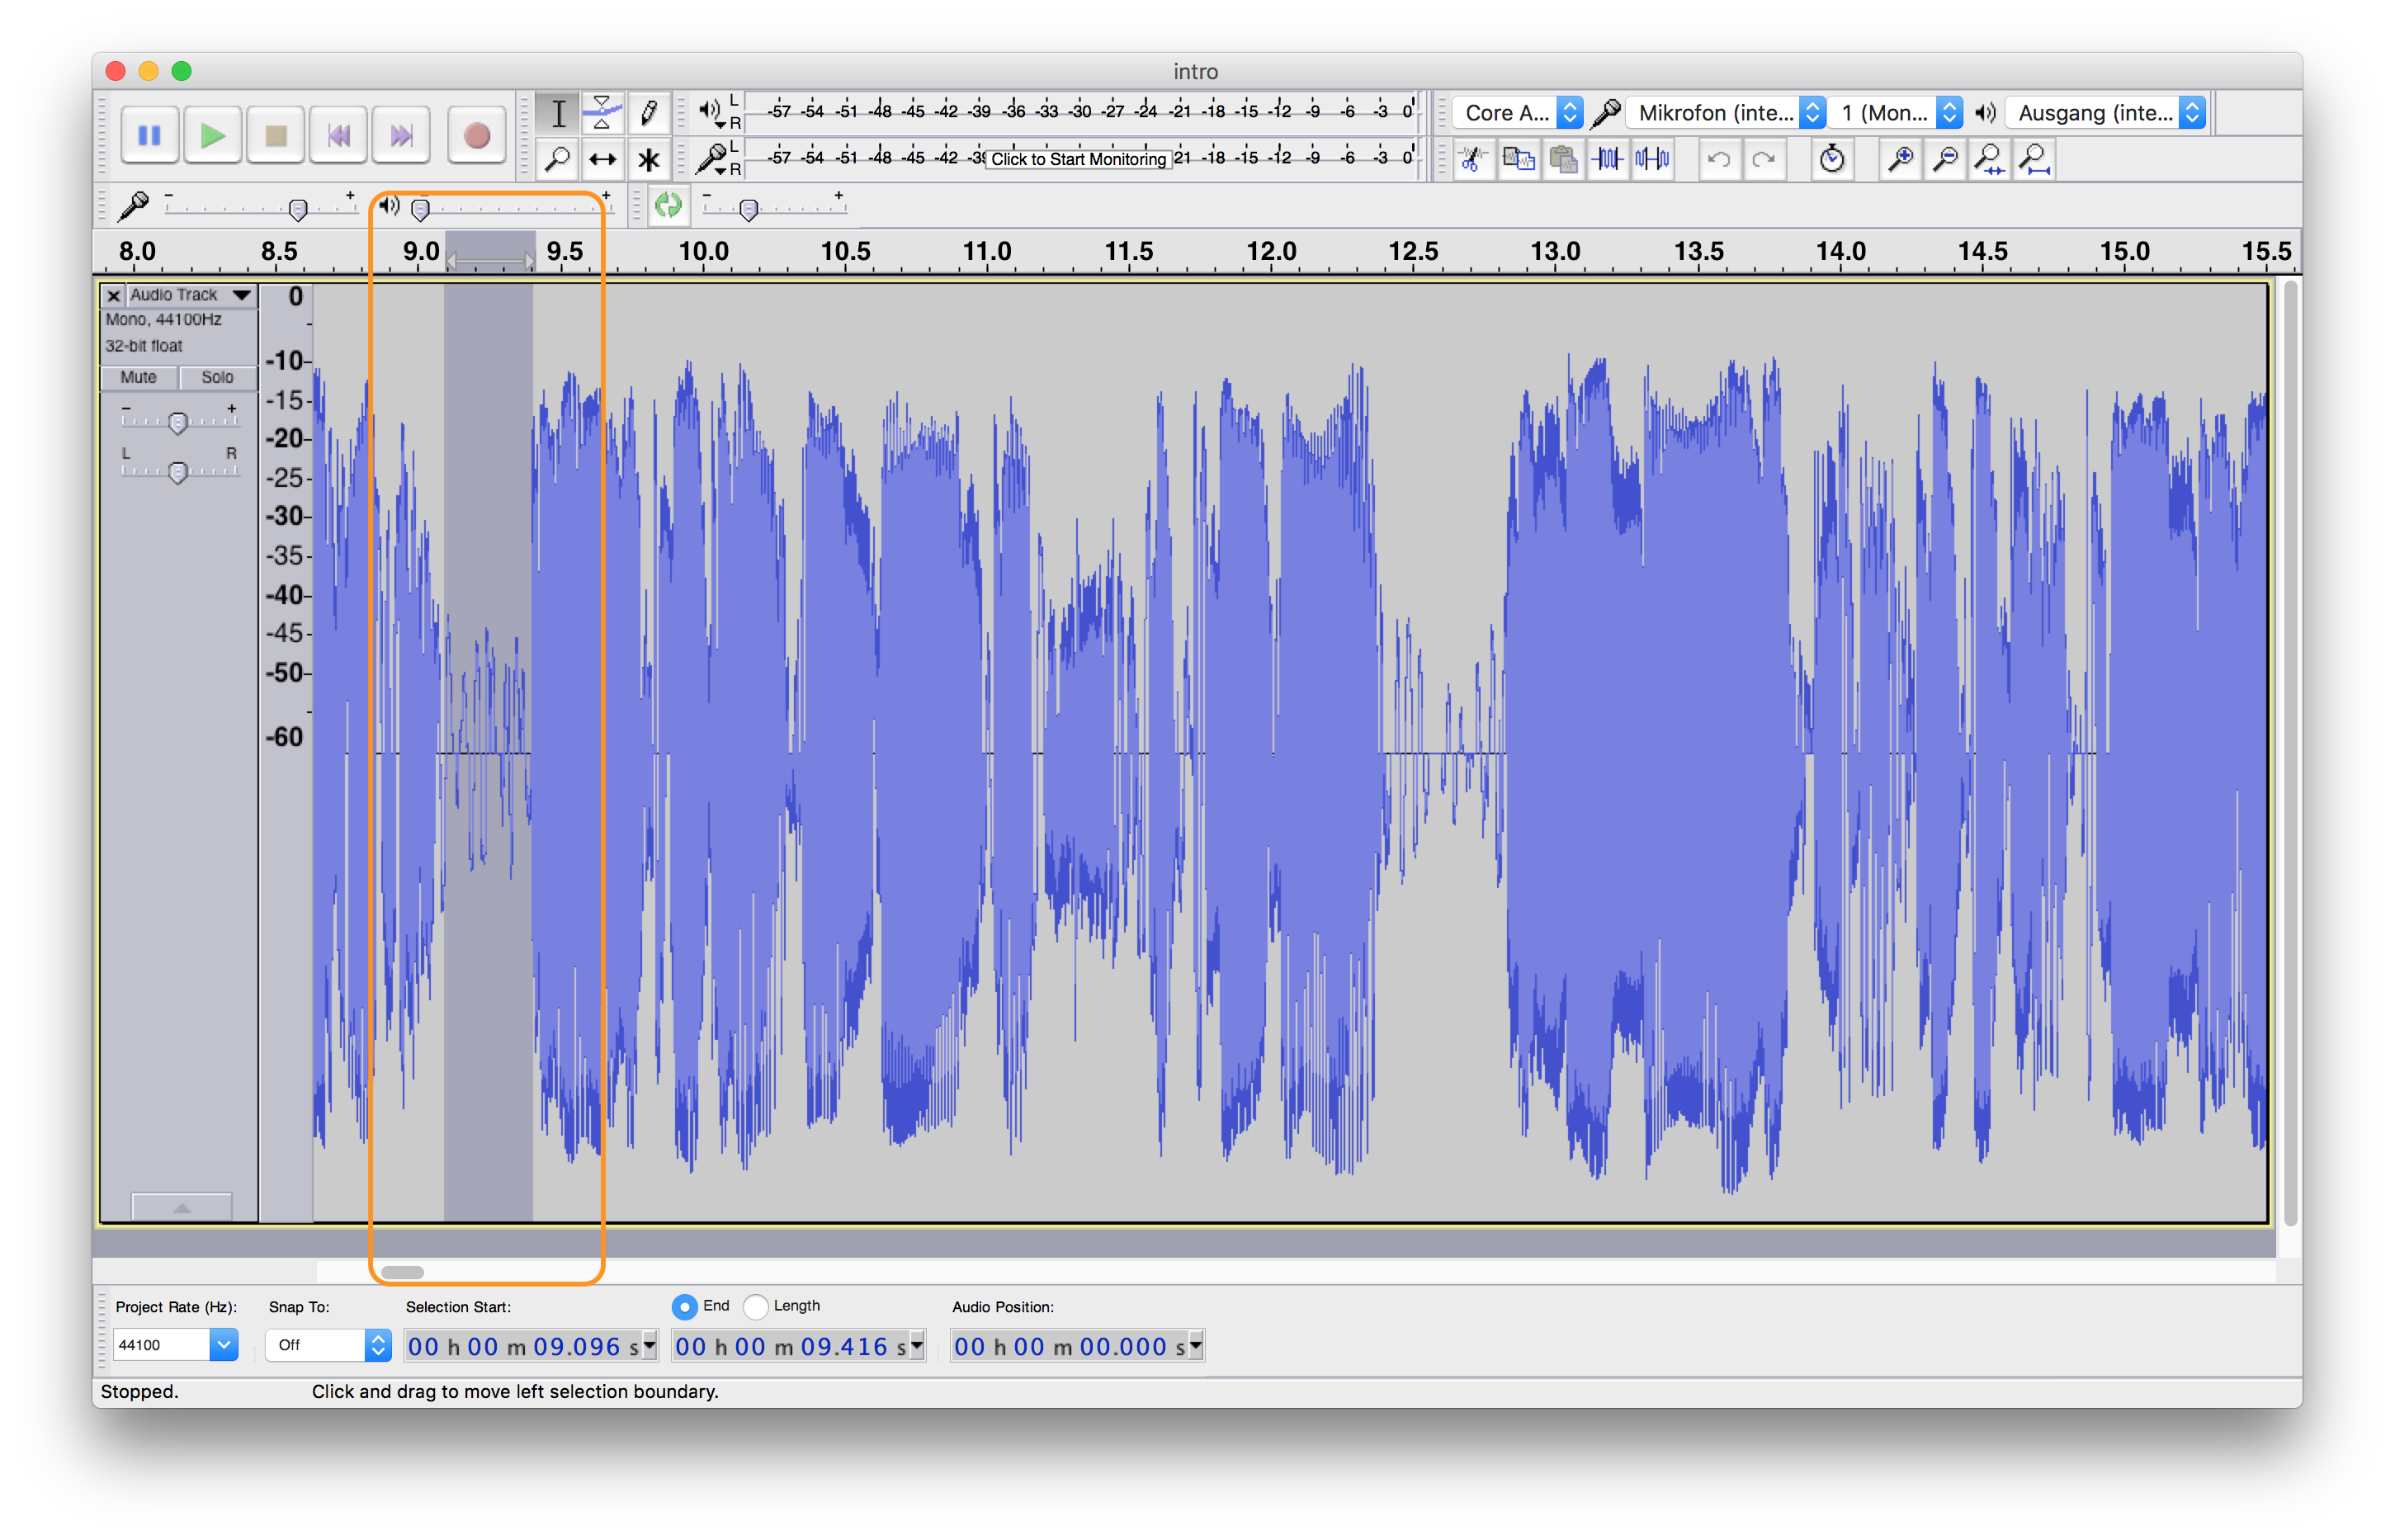 Finding a maximum volume level for applying Audacity’s Noise Gate